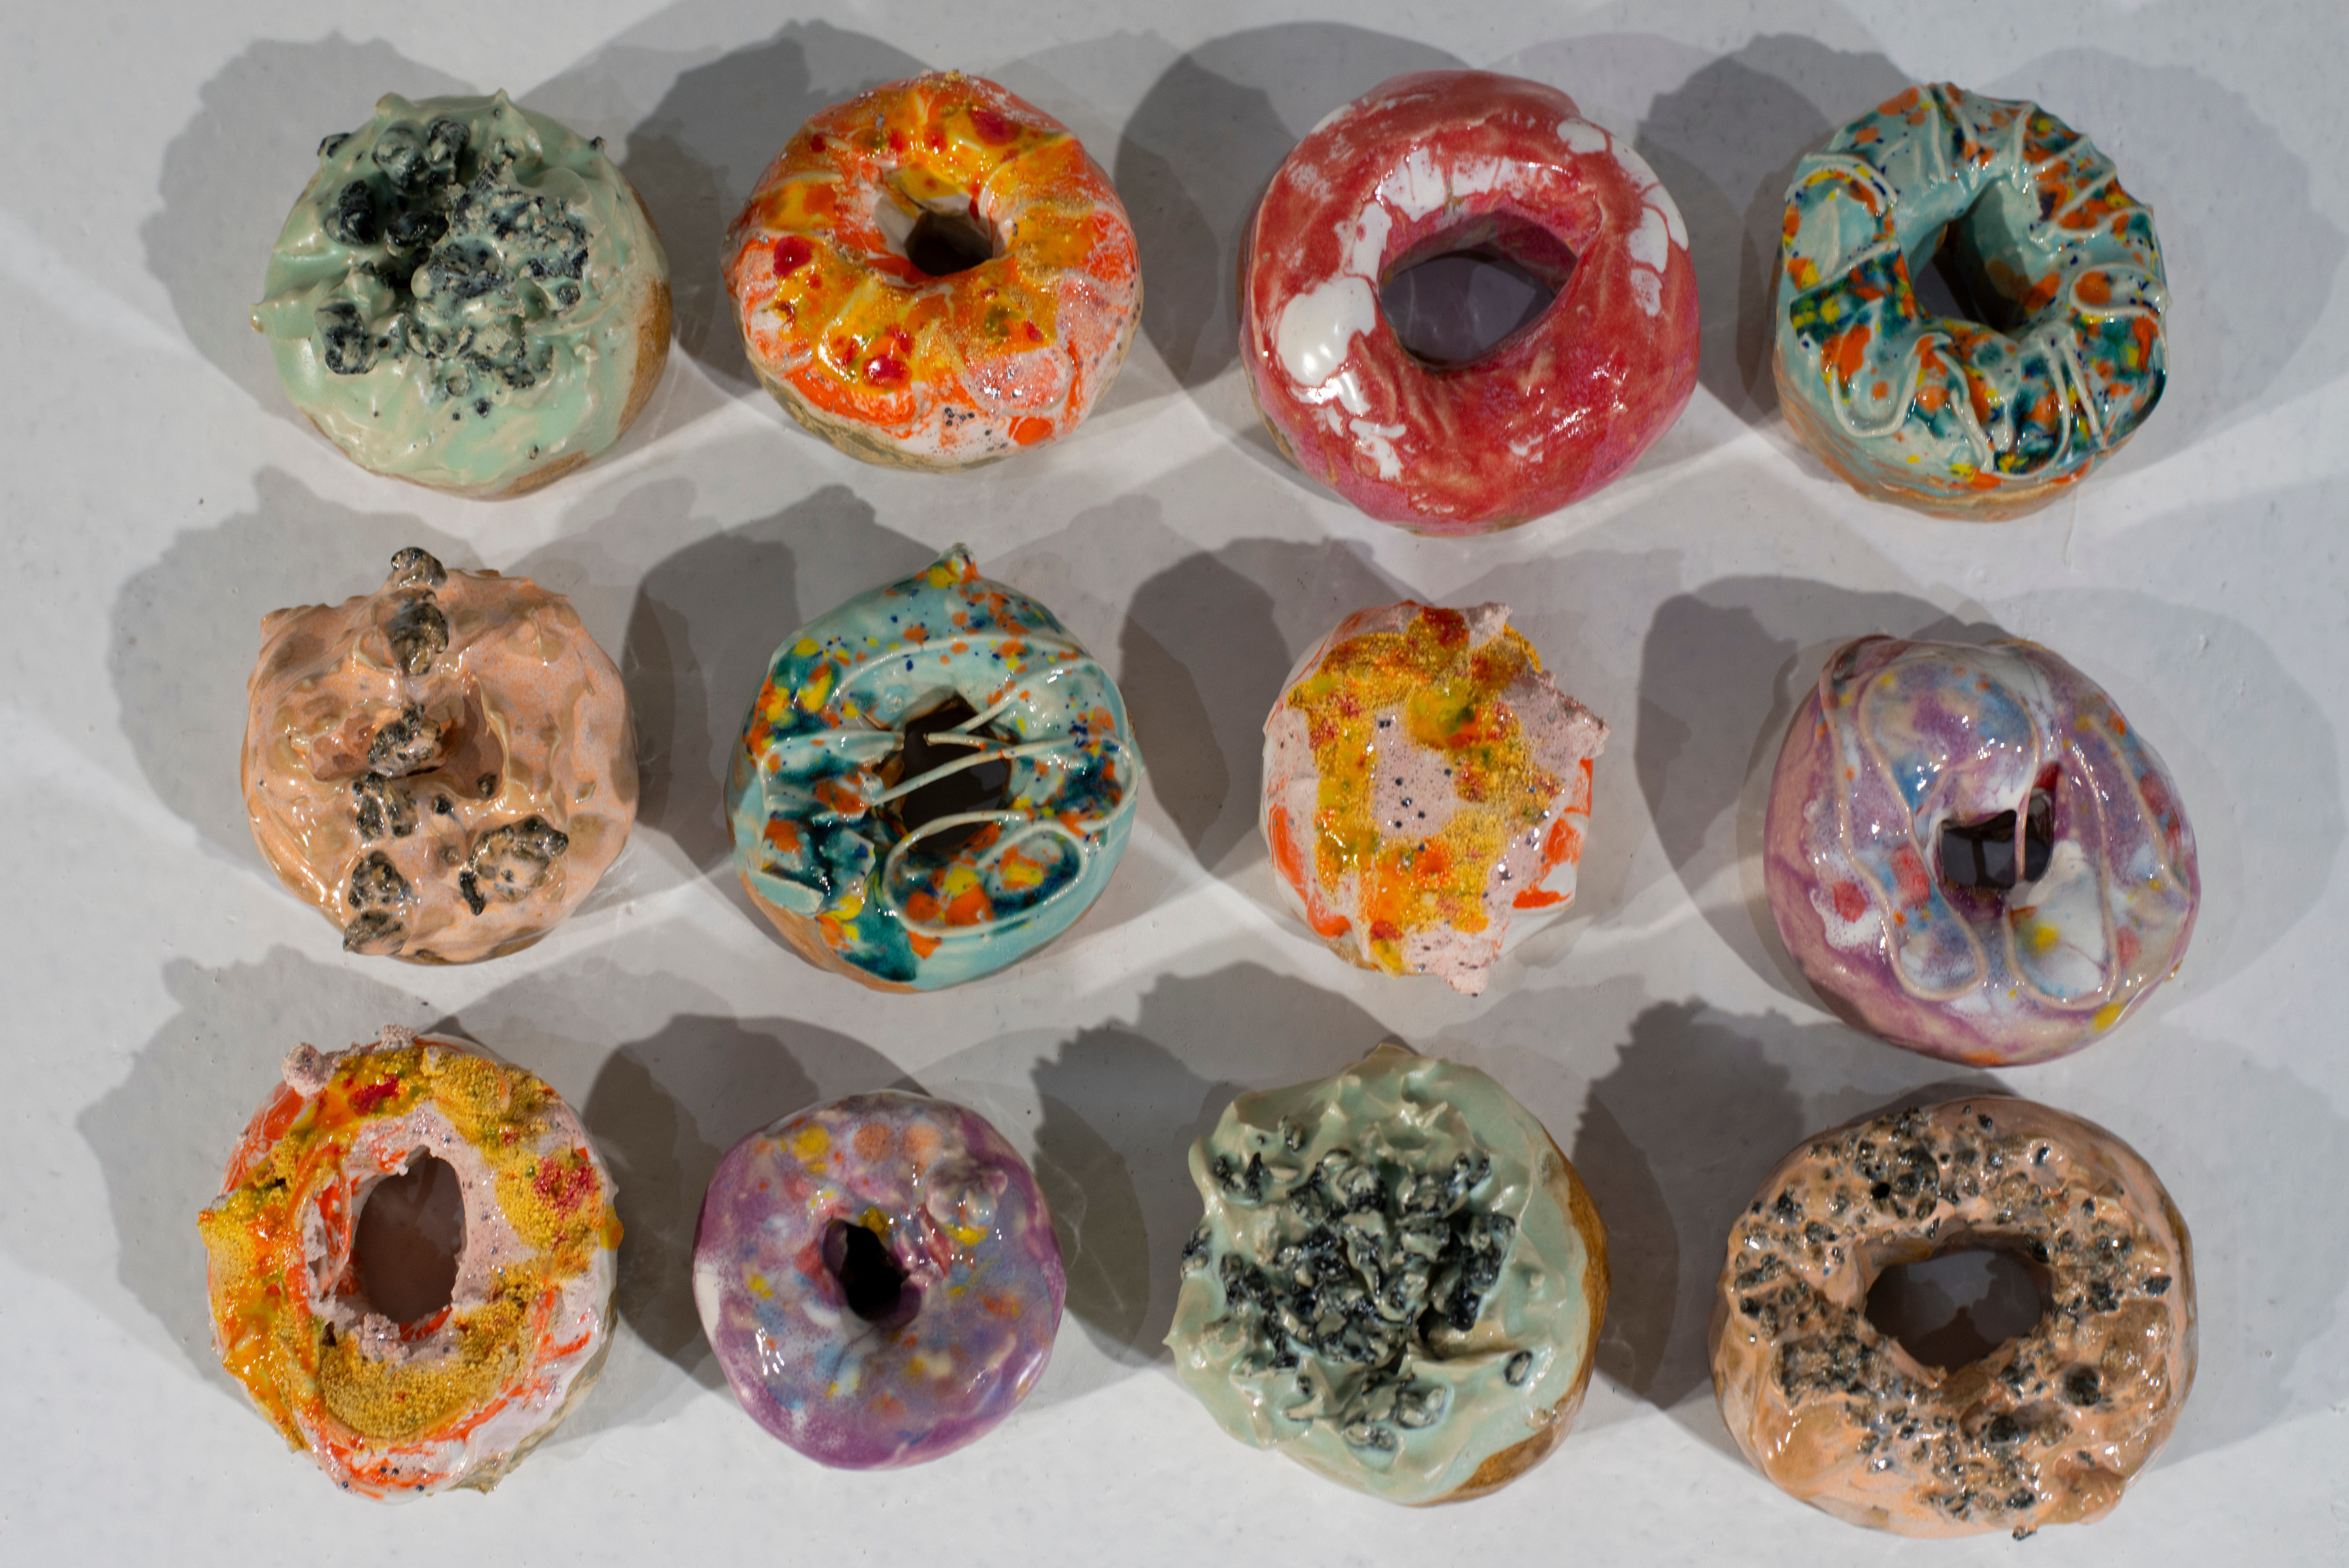 Small ceramic doughnuts, each glazed with a colorful icing.